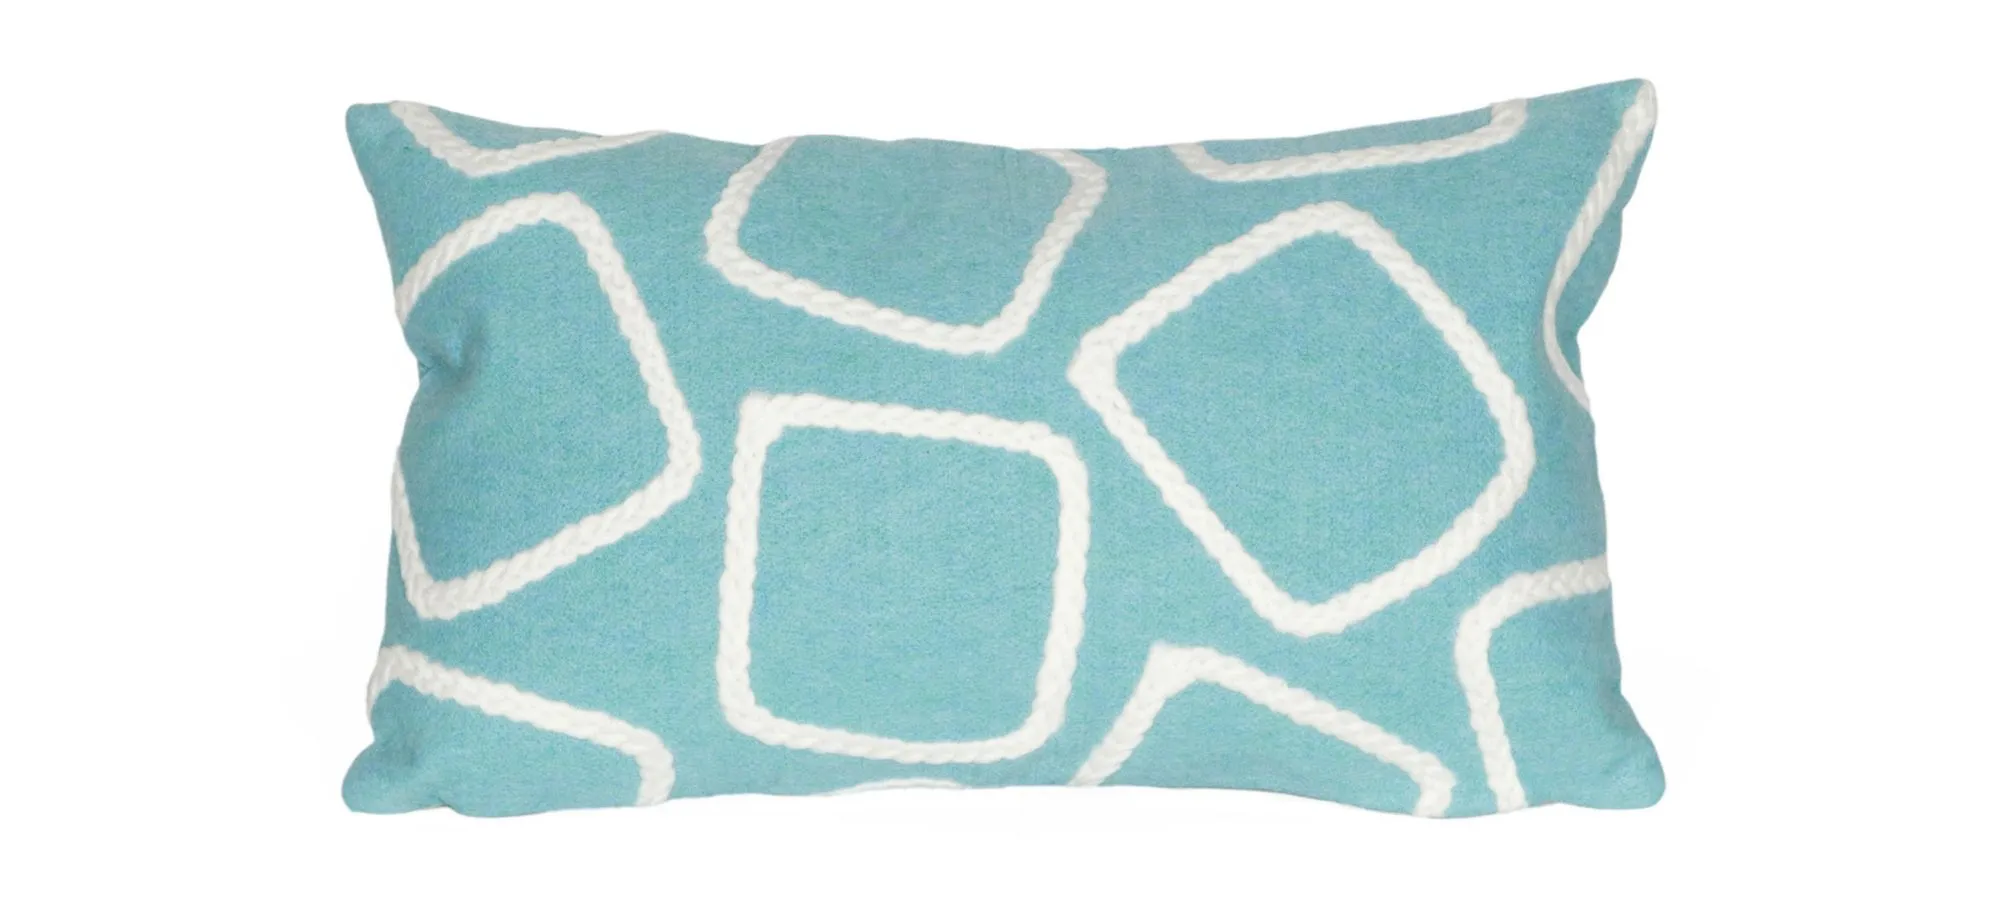 Liora Manne Visions I Squares Pillow in Aqua by Trans-Ocean Import Co Inc